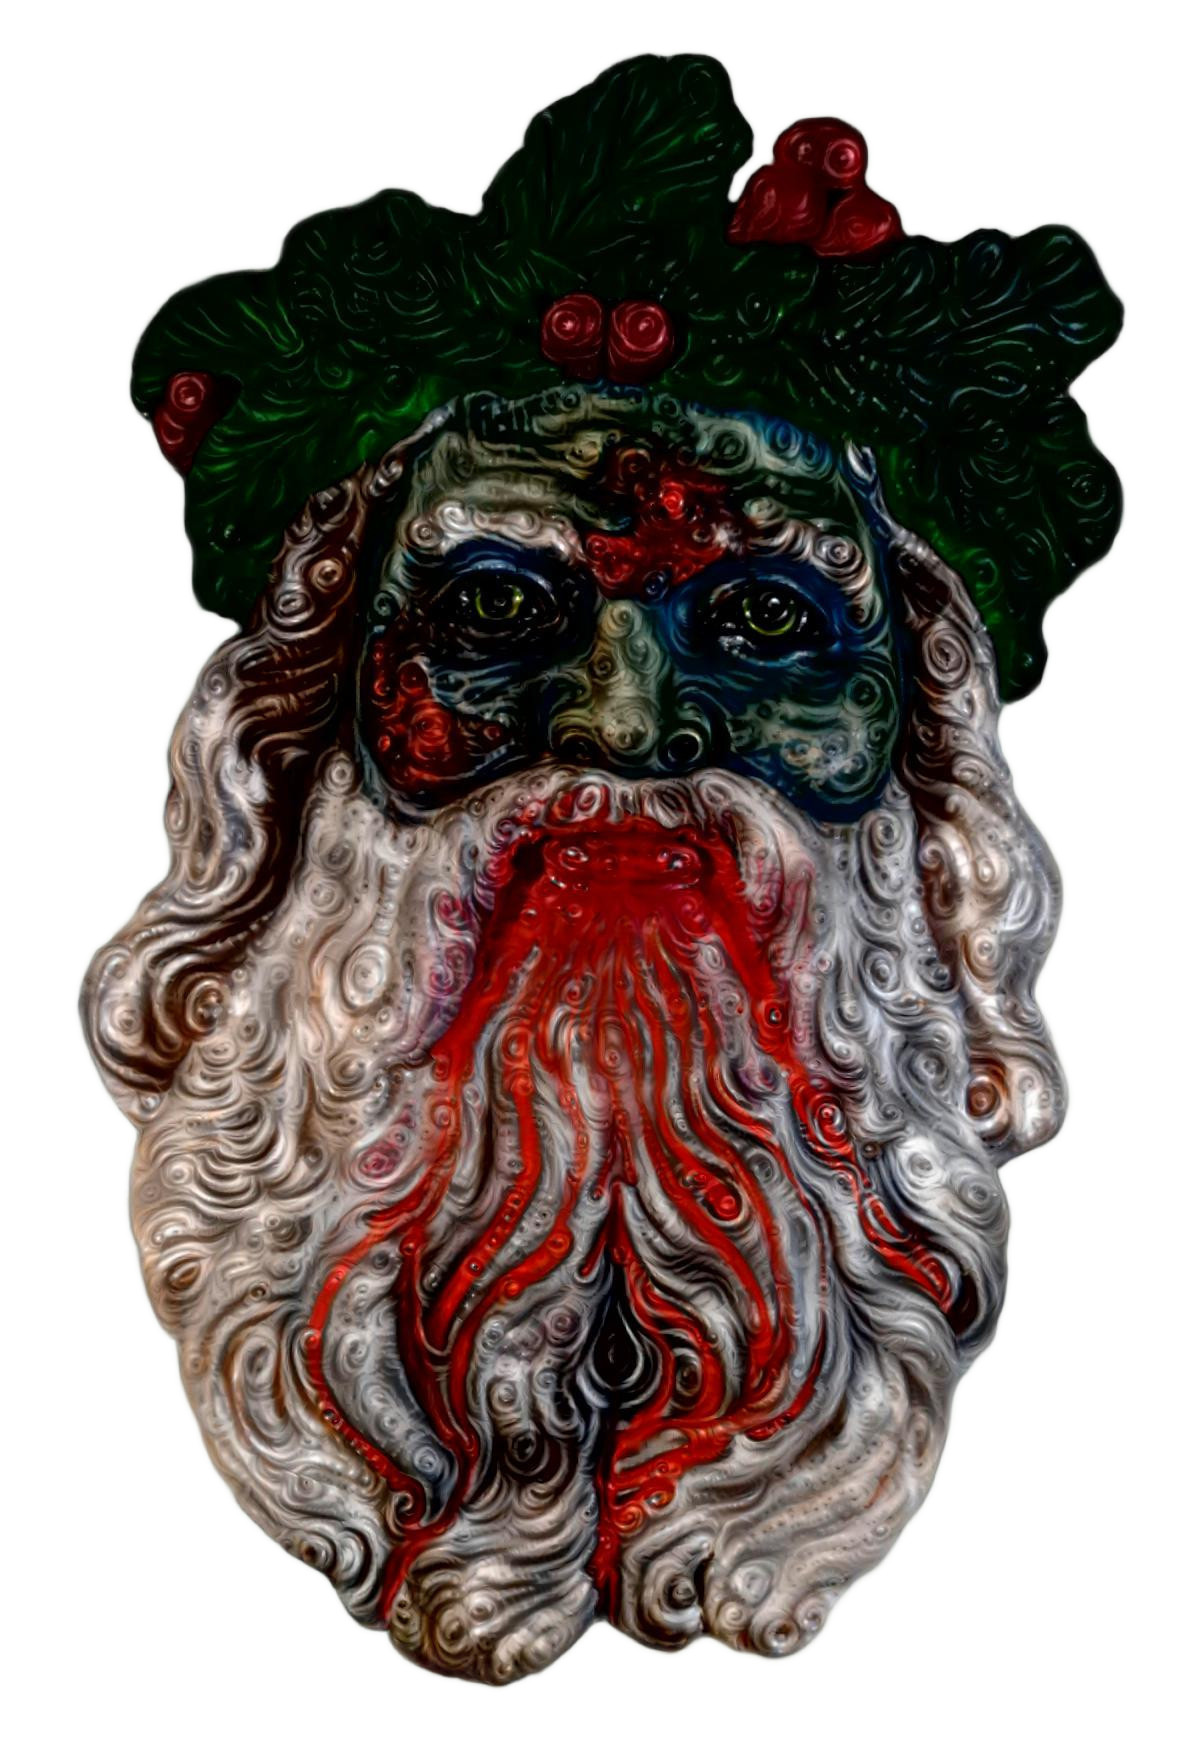 Happy Merry Horror Christmas! This is a photo of a zombie Santa I made once.